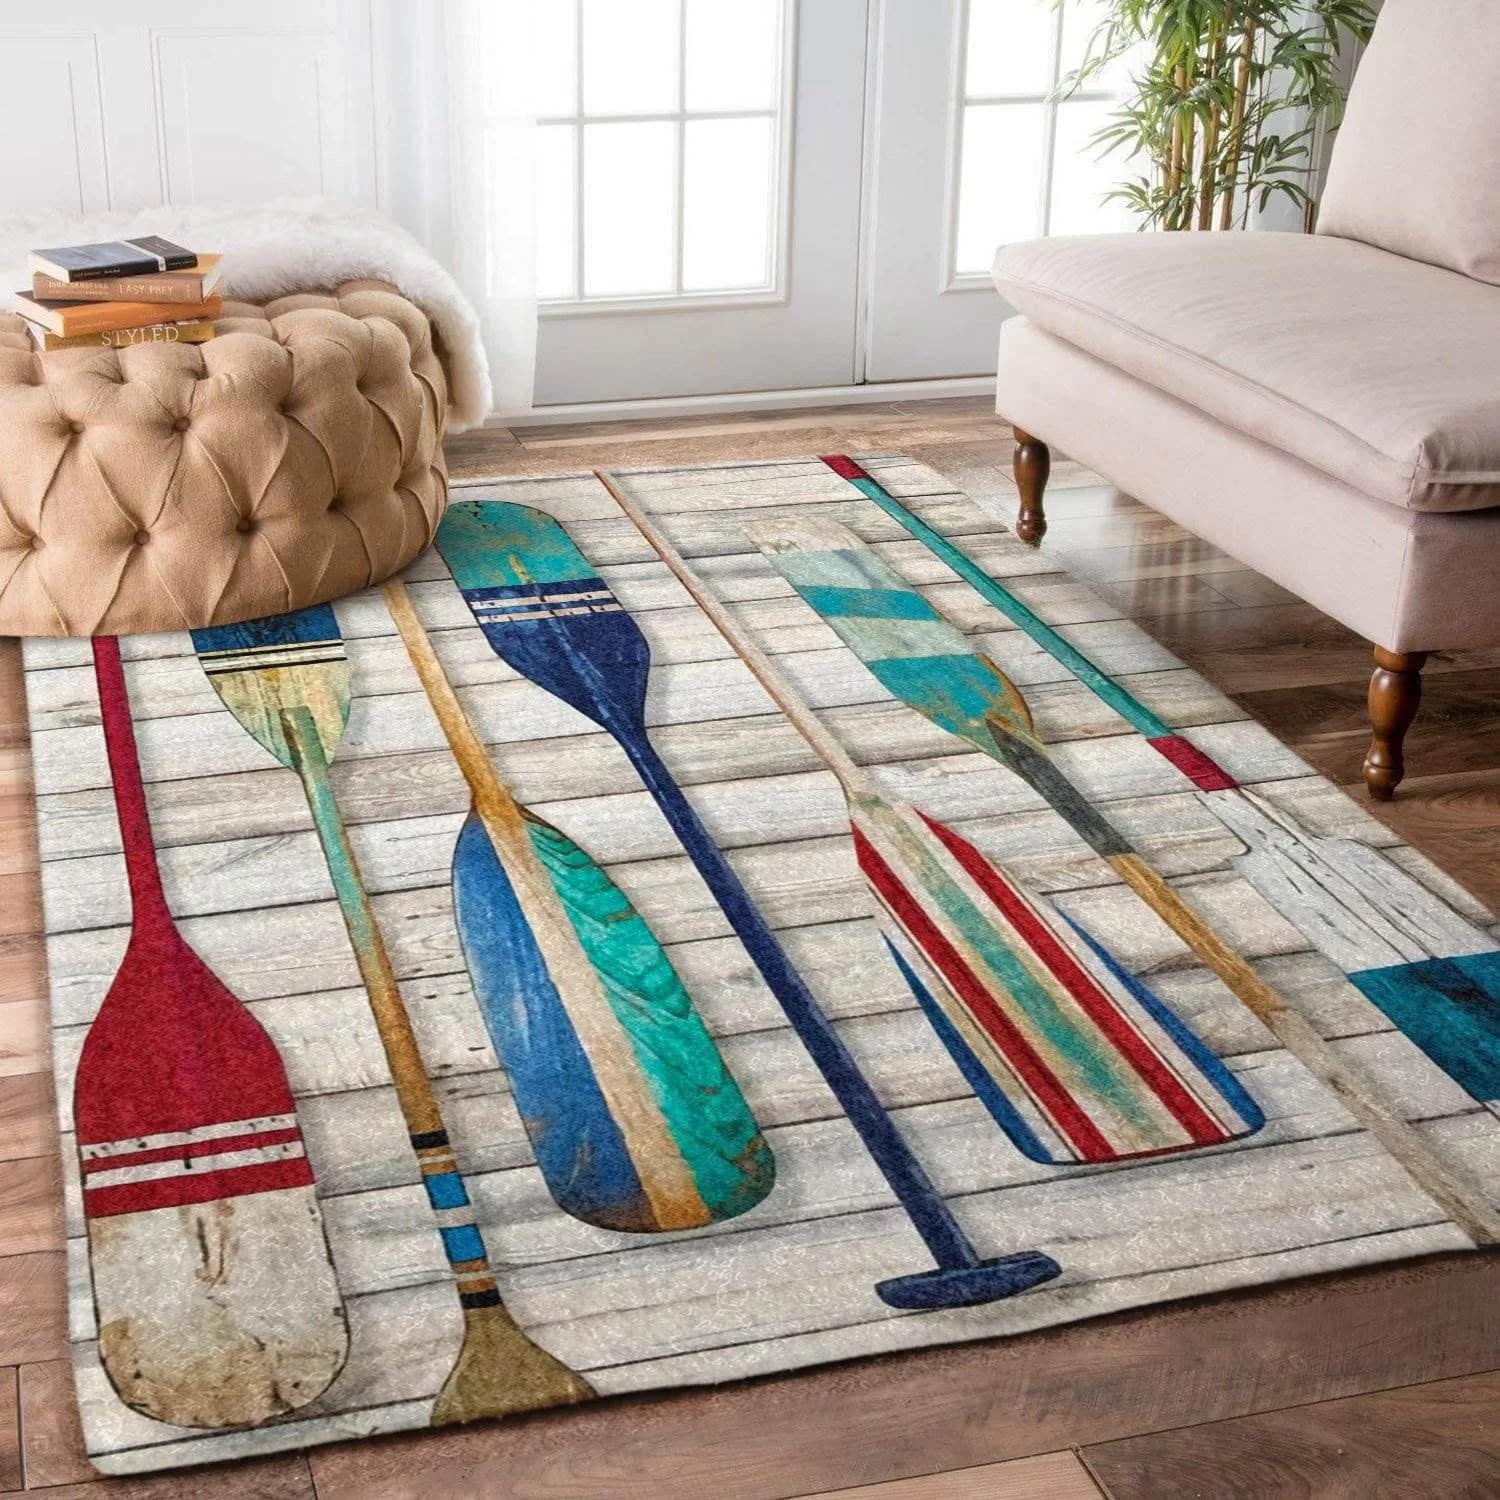 Boat Paddles Limited Edition Amazon Best Seller Sku 262745 Rug